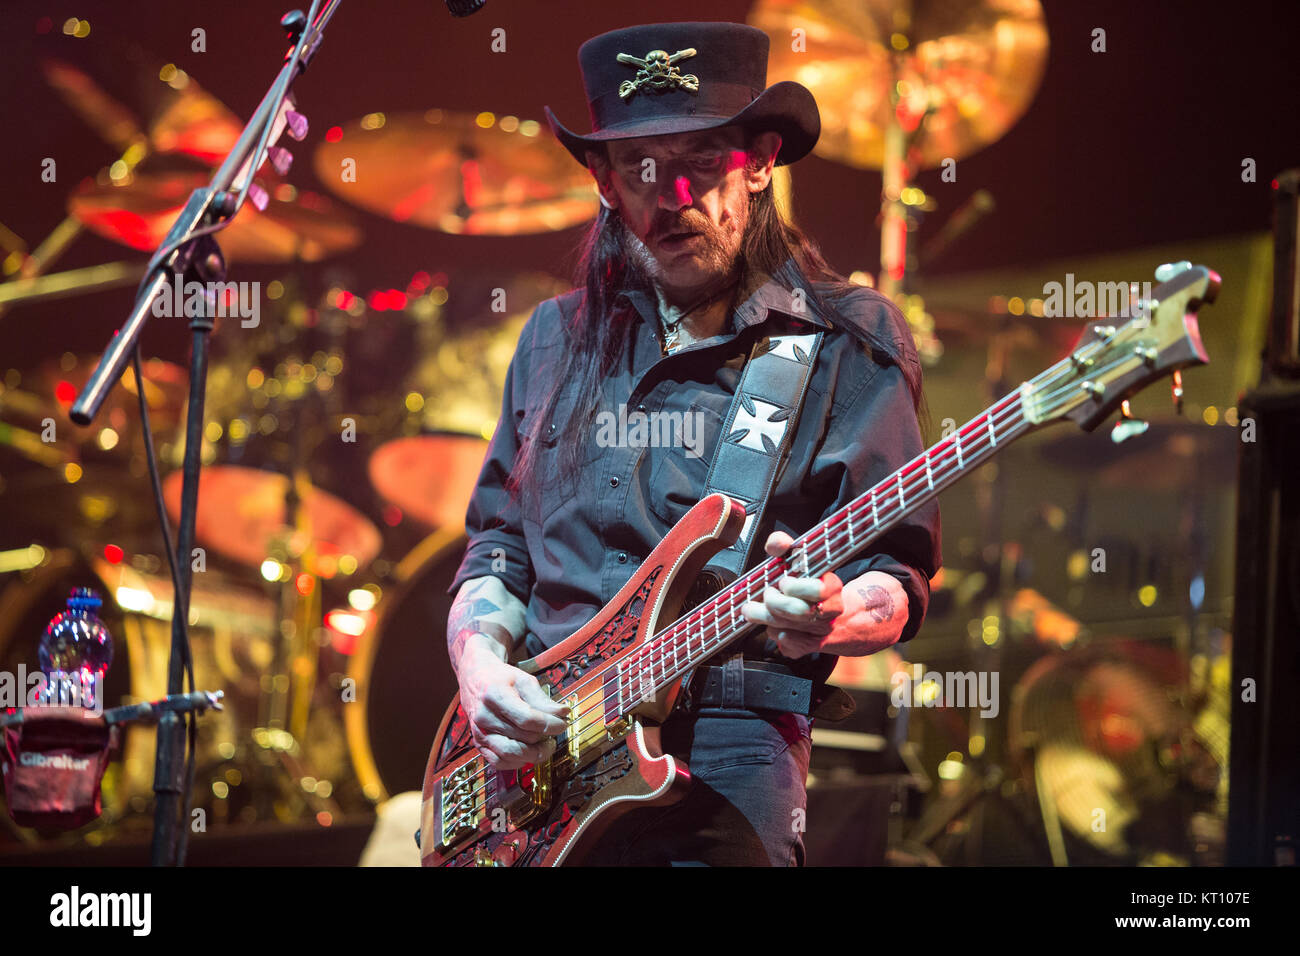 The English hard rock band Motörhead performs a live concert at the Oslo Spektrum. Here bassist, womanizer and vocalist Lemmy is seen live on stage. Norway 03/12 2015. Stock Photo